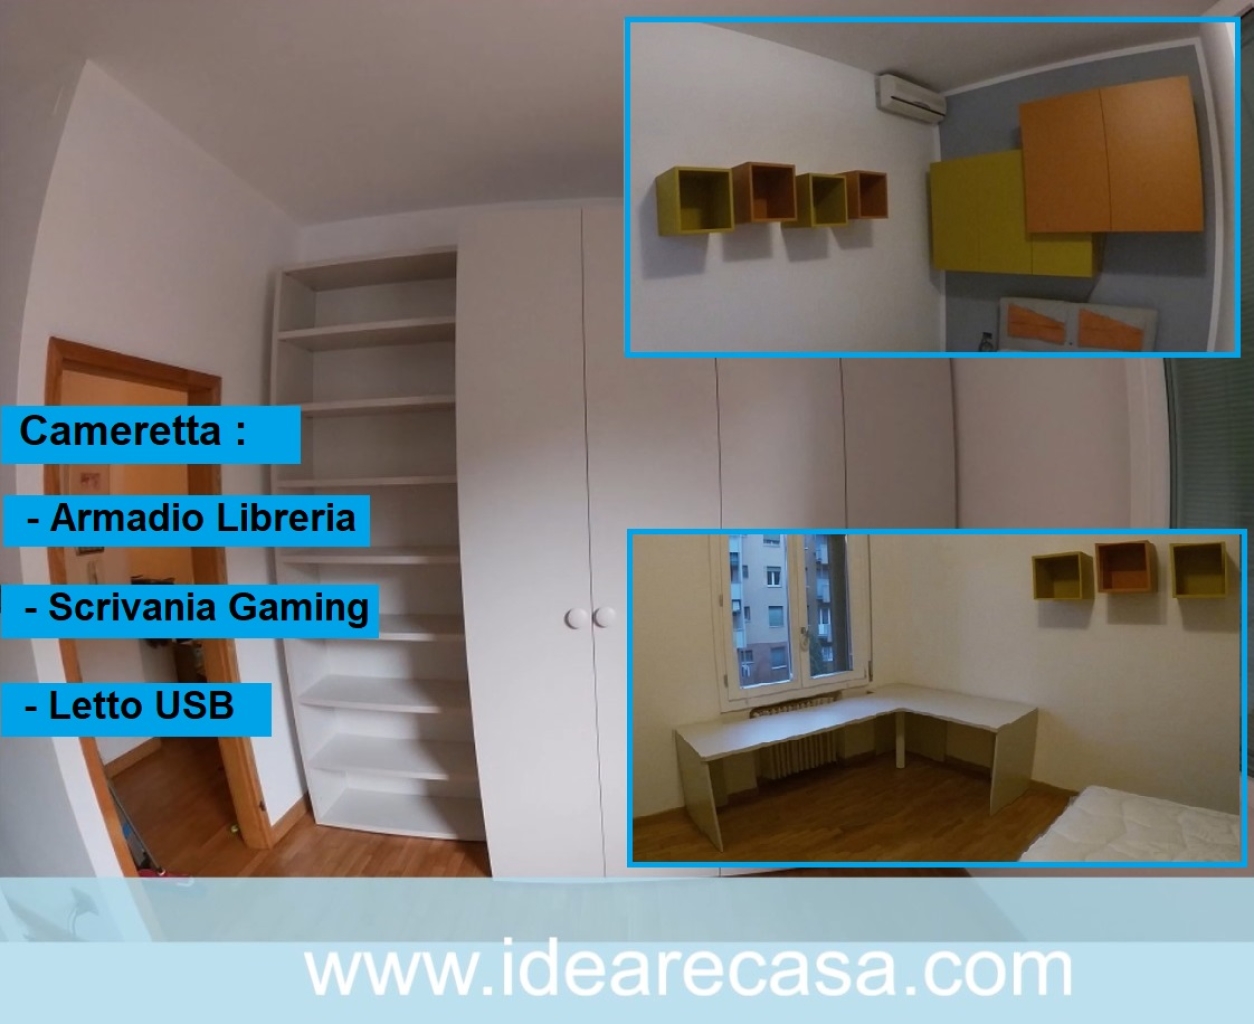 Small bedroom with bookcase wardrobe, gaming desk and USB bed